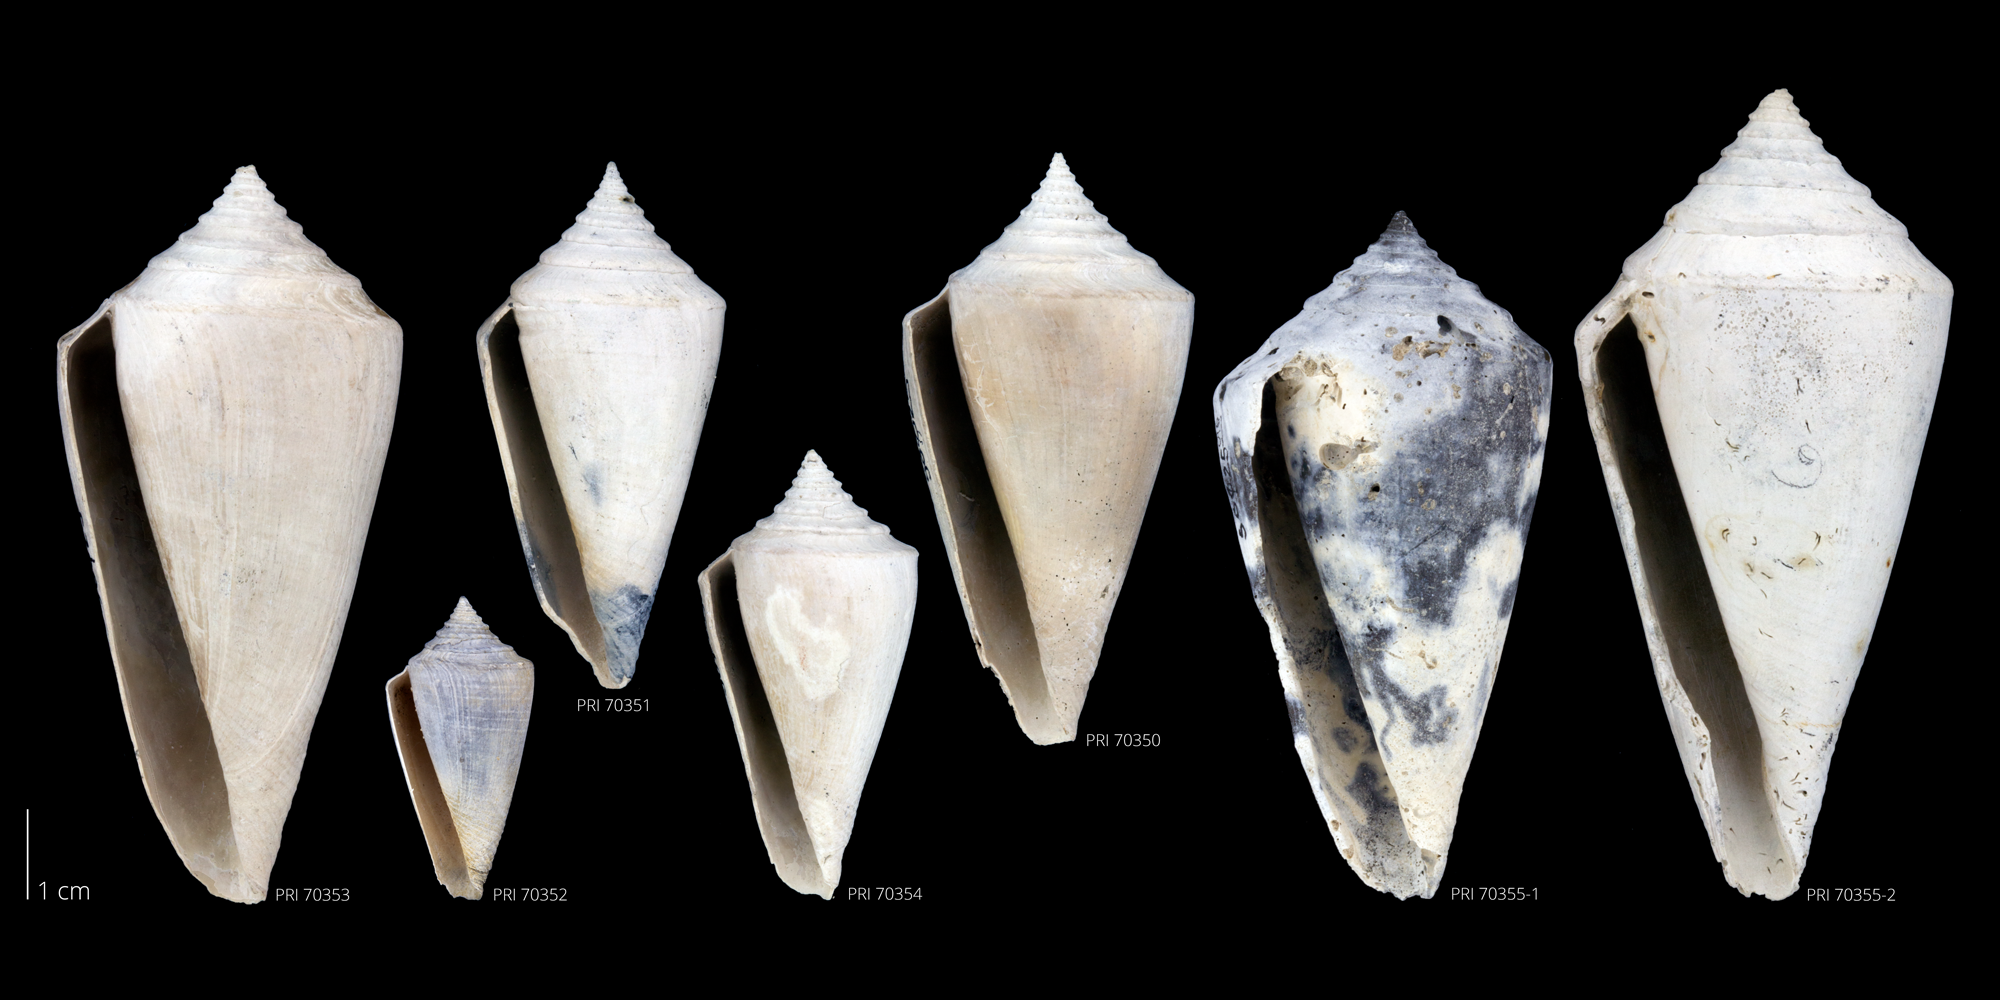 The extinct cone snail Conus adversarius. The species is unique among cone snails in having a shell that opens to the left (sinistral coiling); all others have shells that open to the right (dextral coiling). Note the subtle morphological differences between the individual specimens. 